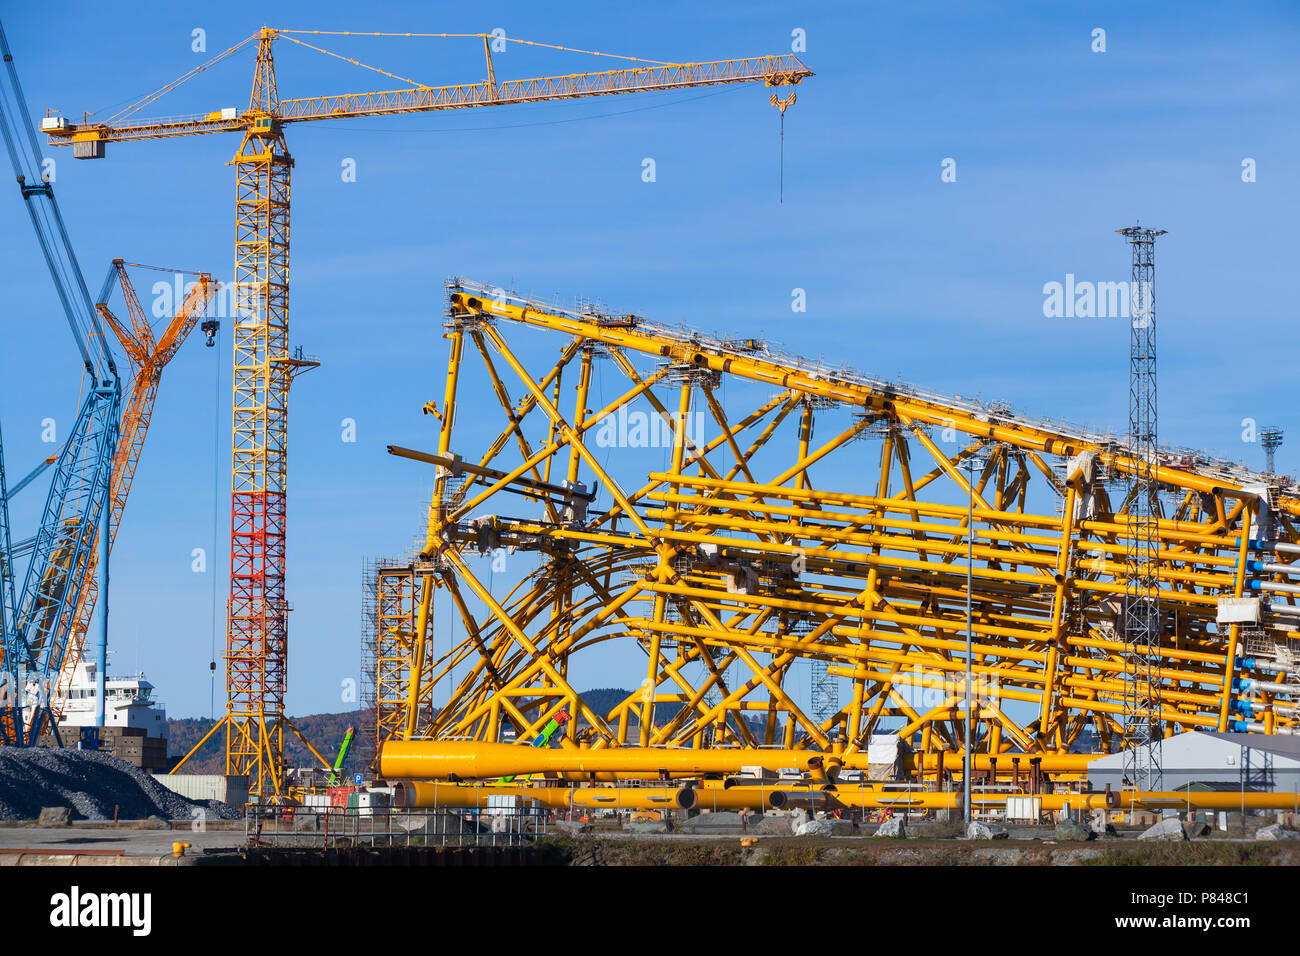 Oil production platform is under construction. Industrial landscape of Verdal, Norway Stock Photo